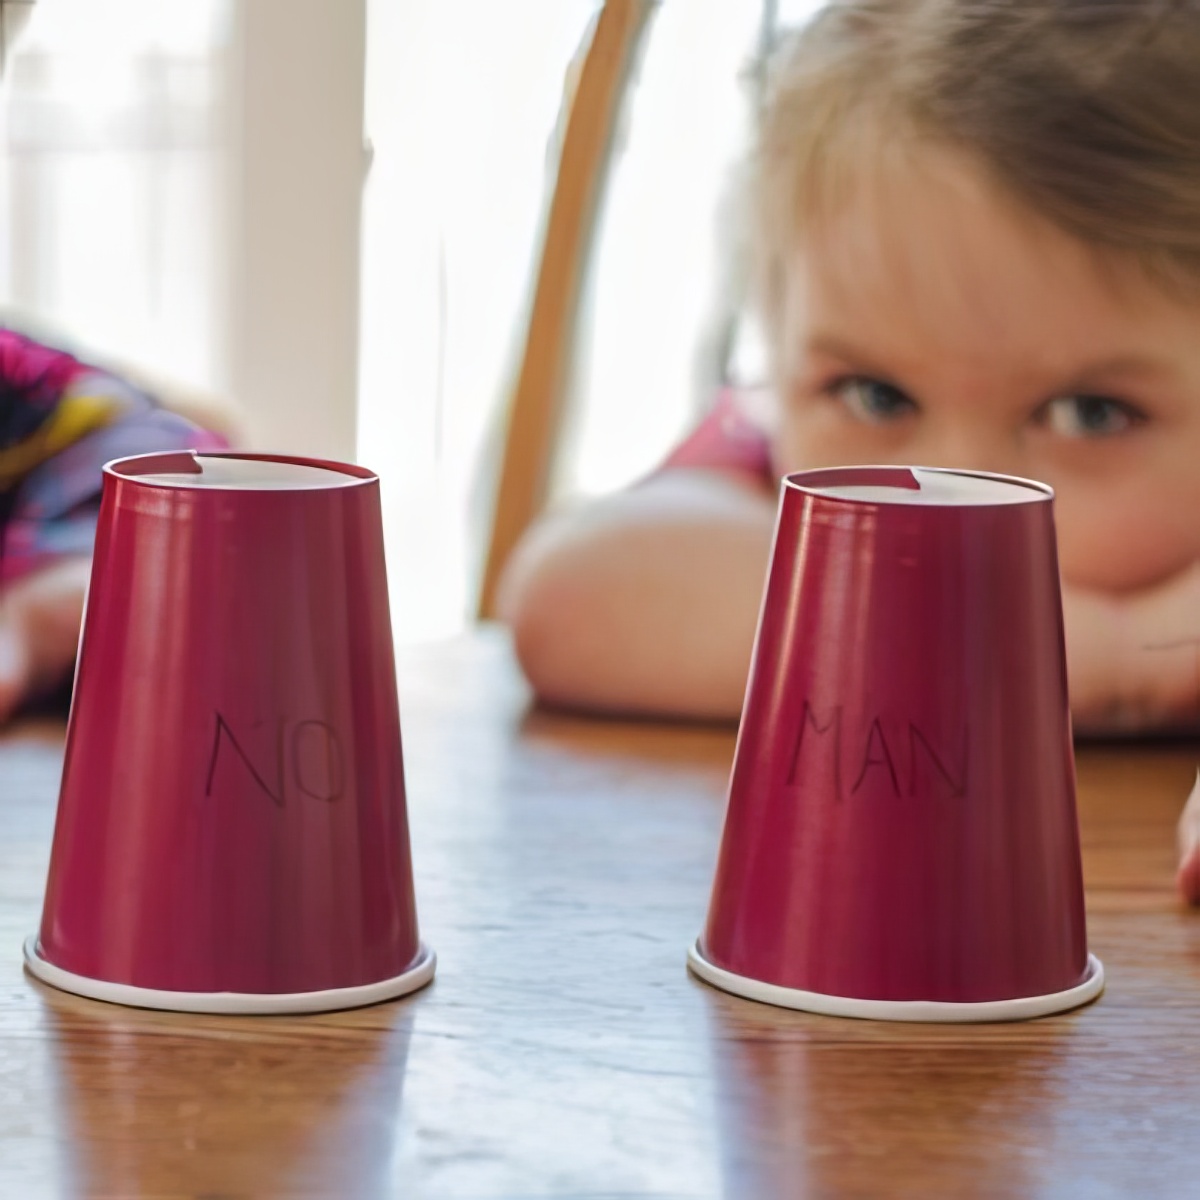 Have fun and learning and guessing using this sight word cups with your kids!